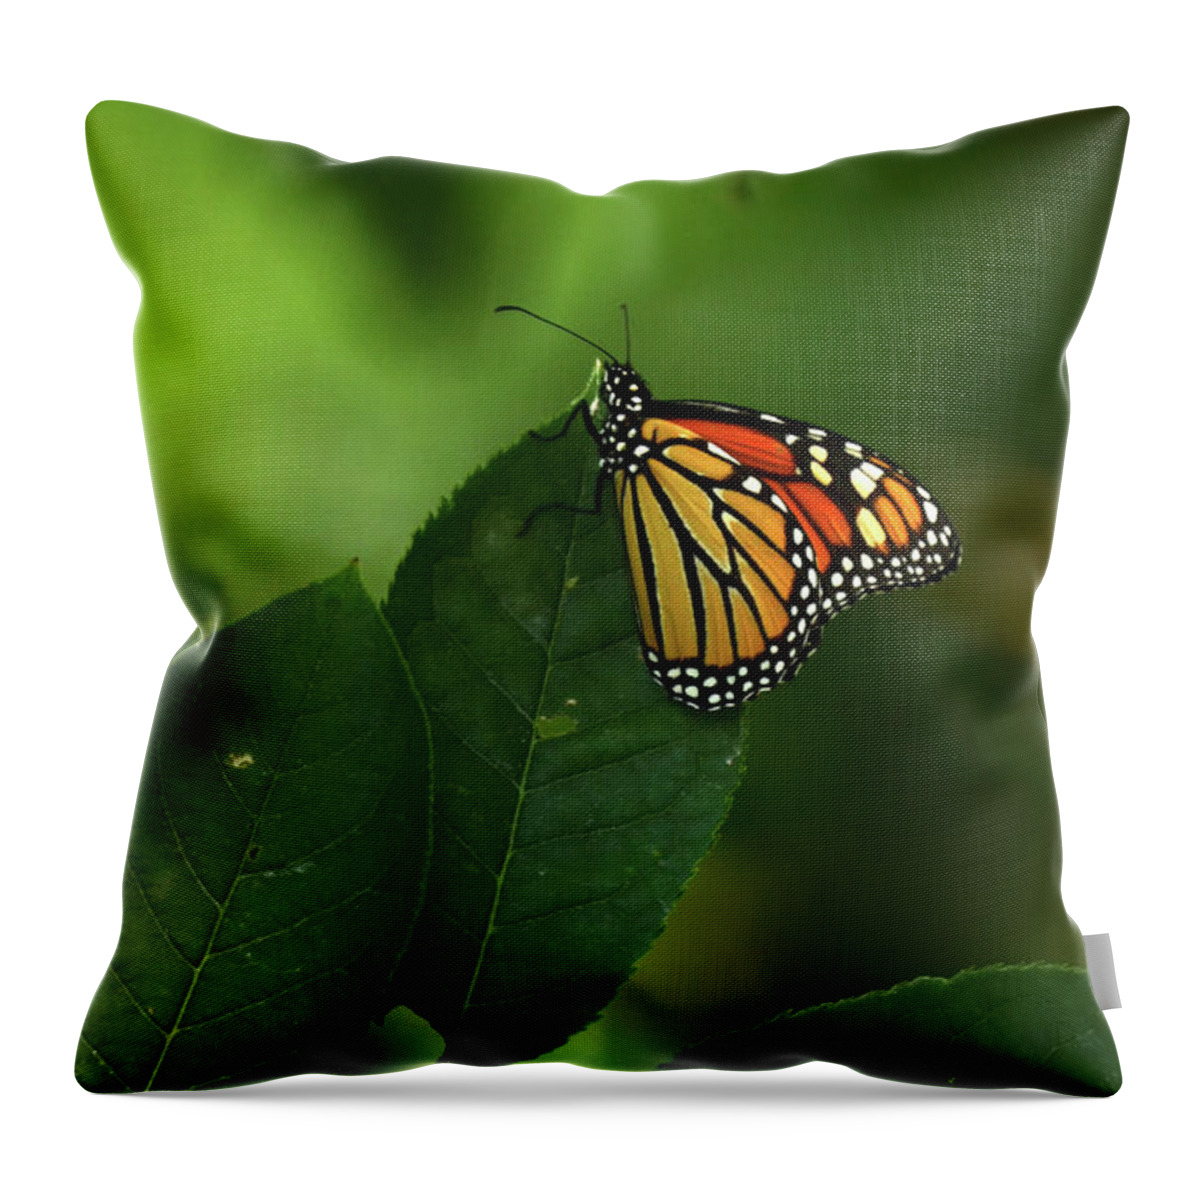 Flowers Throw Pillow featuring the photograph Monarch on Leaf by Ann Bridges